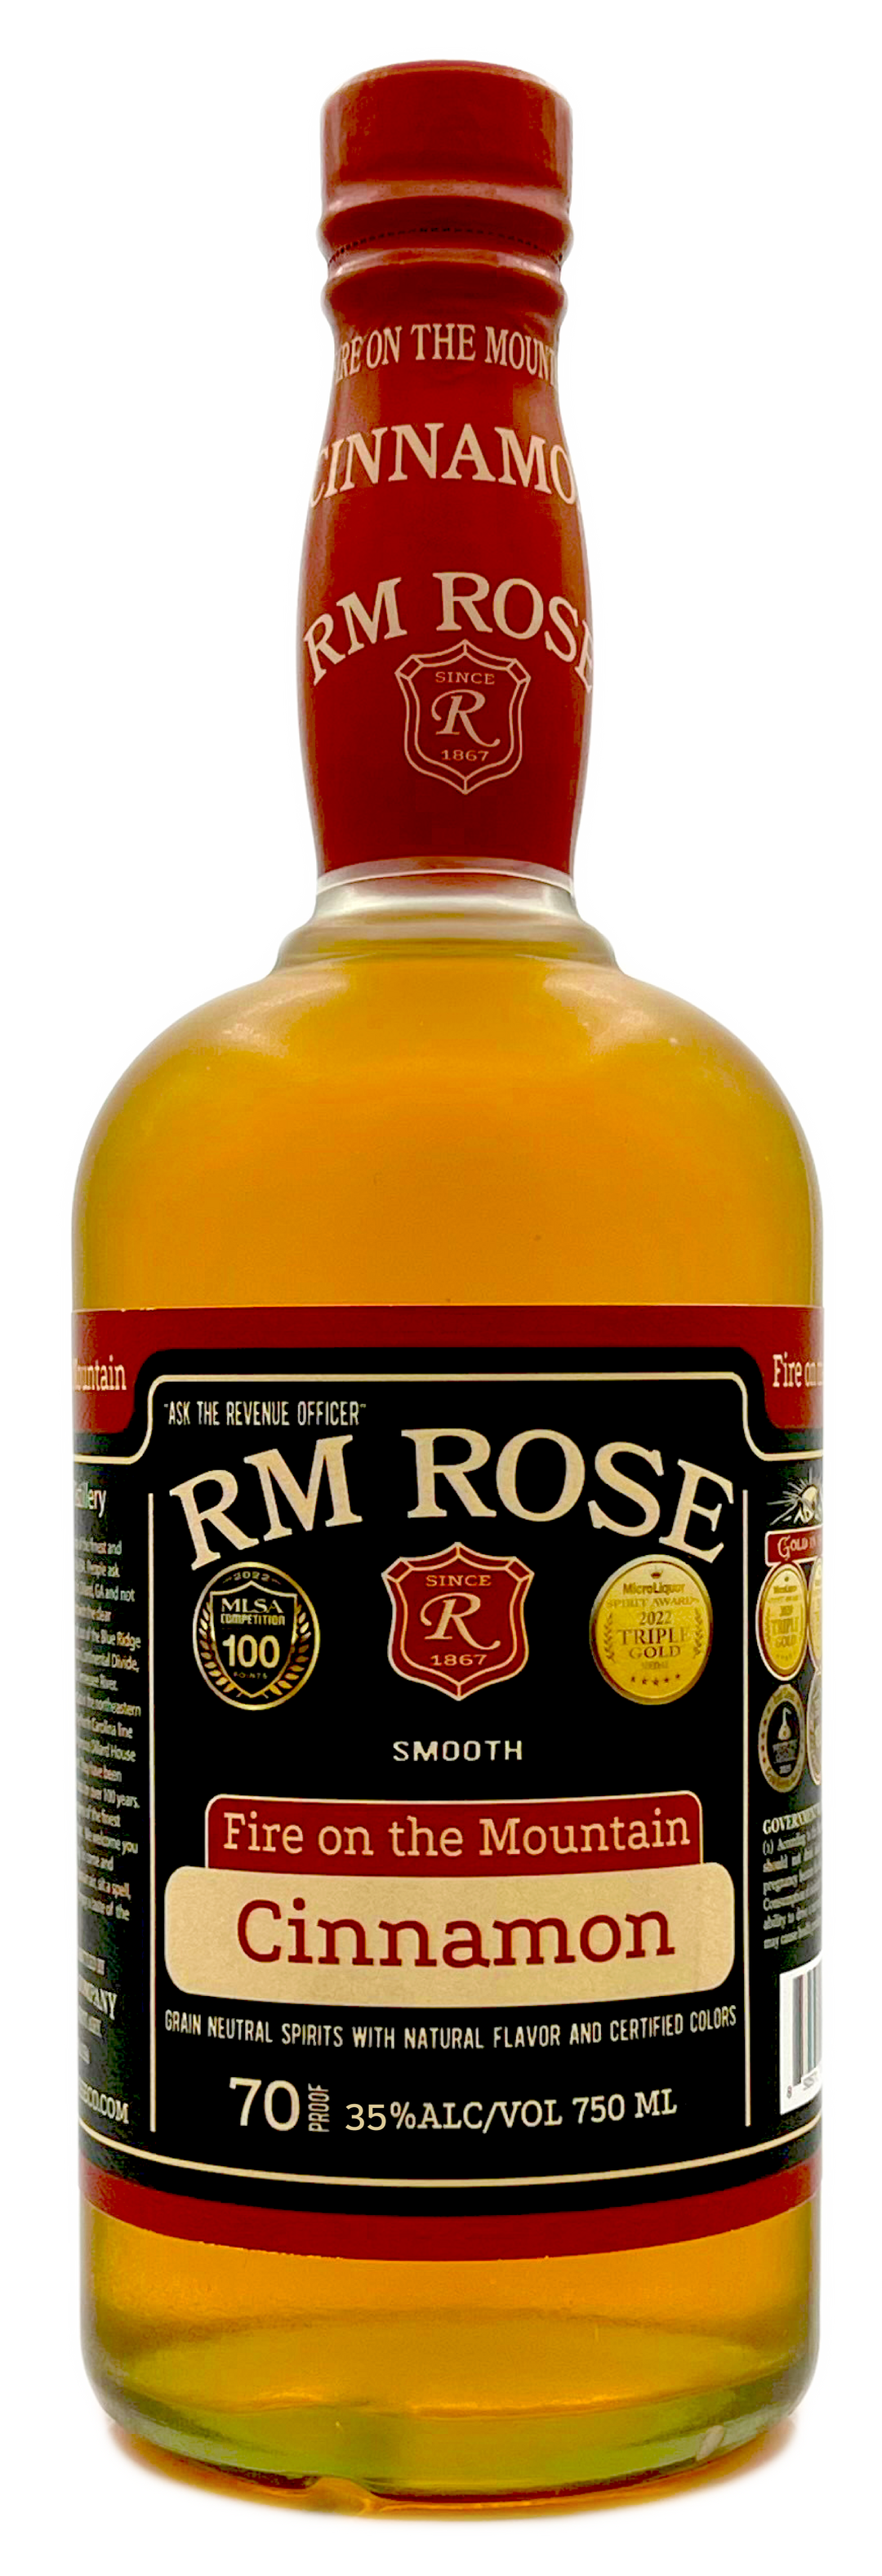 RM Rose Fire on the Mountain Cinnamon Whiskey